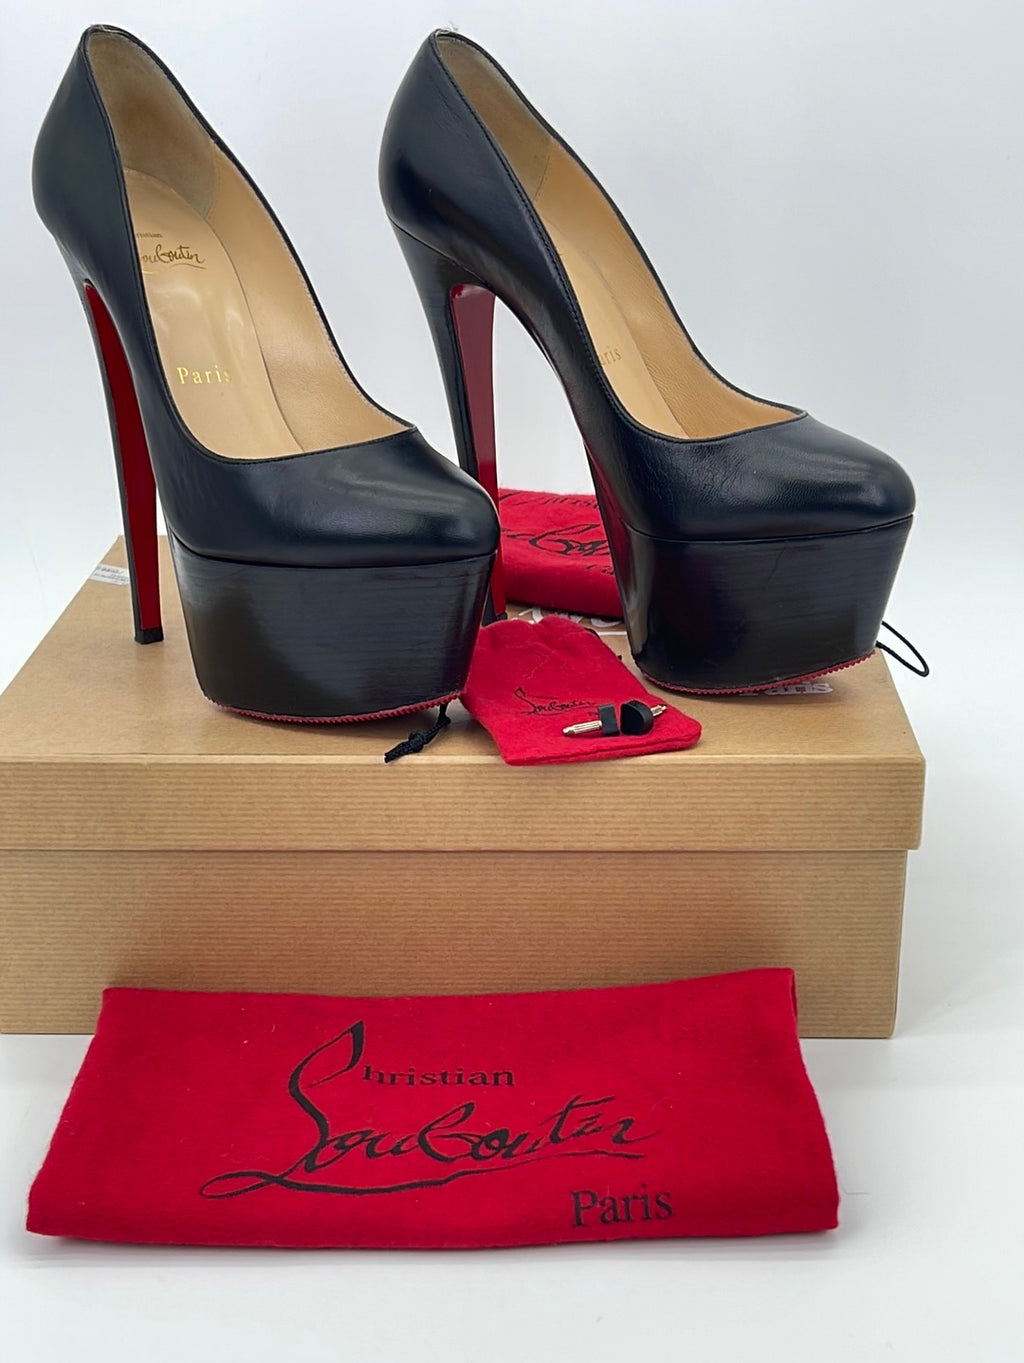 Preloved Christian Louboutin Pigalle Pump Red Sole Black Heels 312 040 –  KimmieBBags LLC